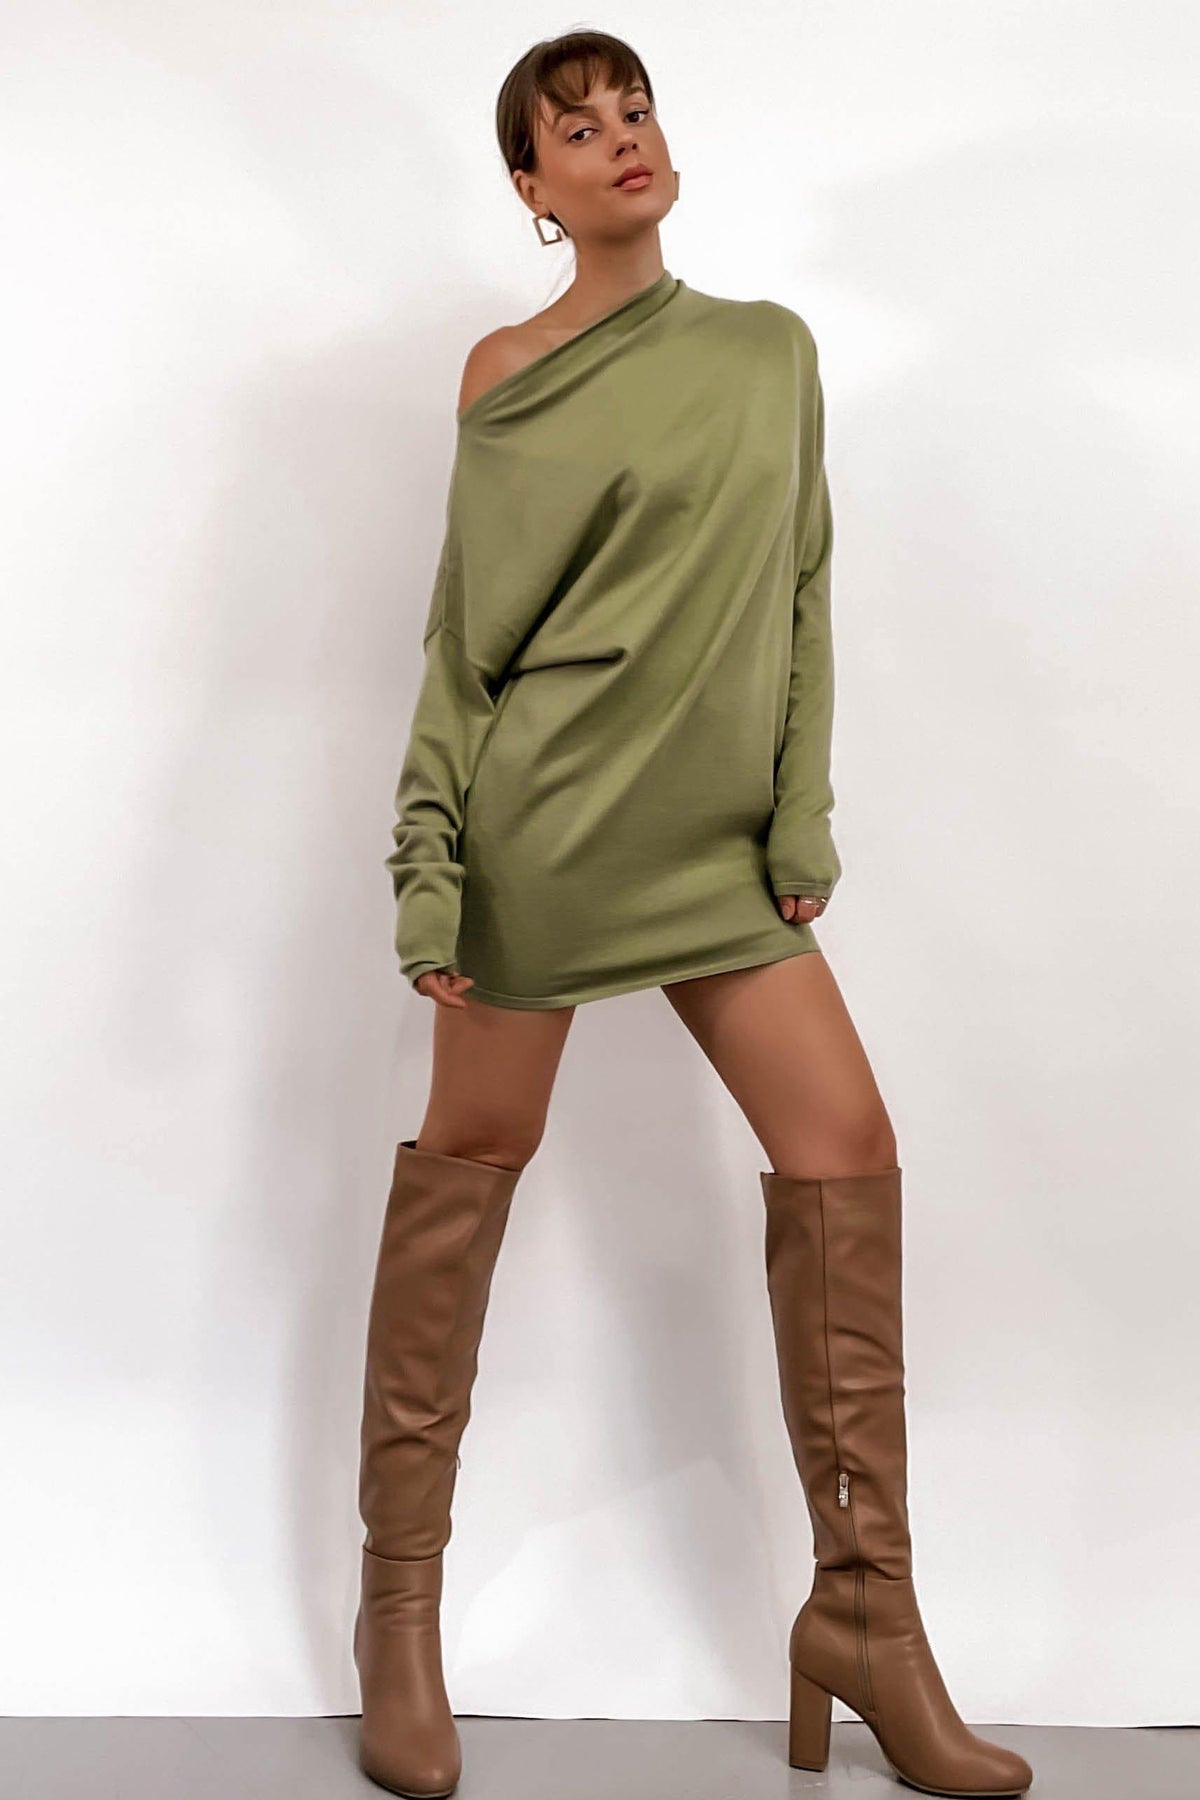 Urica Dress, ACRYLIC &amp; WOOL, ACRYLIC AND WOOL, DRESS, DRESSES, GREEN, LONG SLEEVE, NEW ARRIVALS, WOOL &amp; ACRYLIC, WOOL AND ACRYLIC, Our New Urica Dress Is Now Only $65.00 Exclusive At Mishkah, Our New Urica Dress is now only $65.00-We Have The Latest Women&#39;s Tops @ Mishkah Online Fashion Boutique-MISHKAH